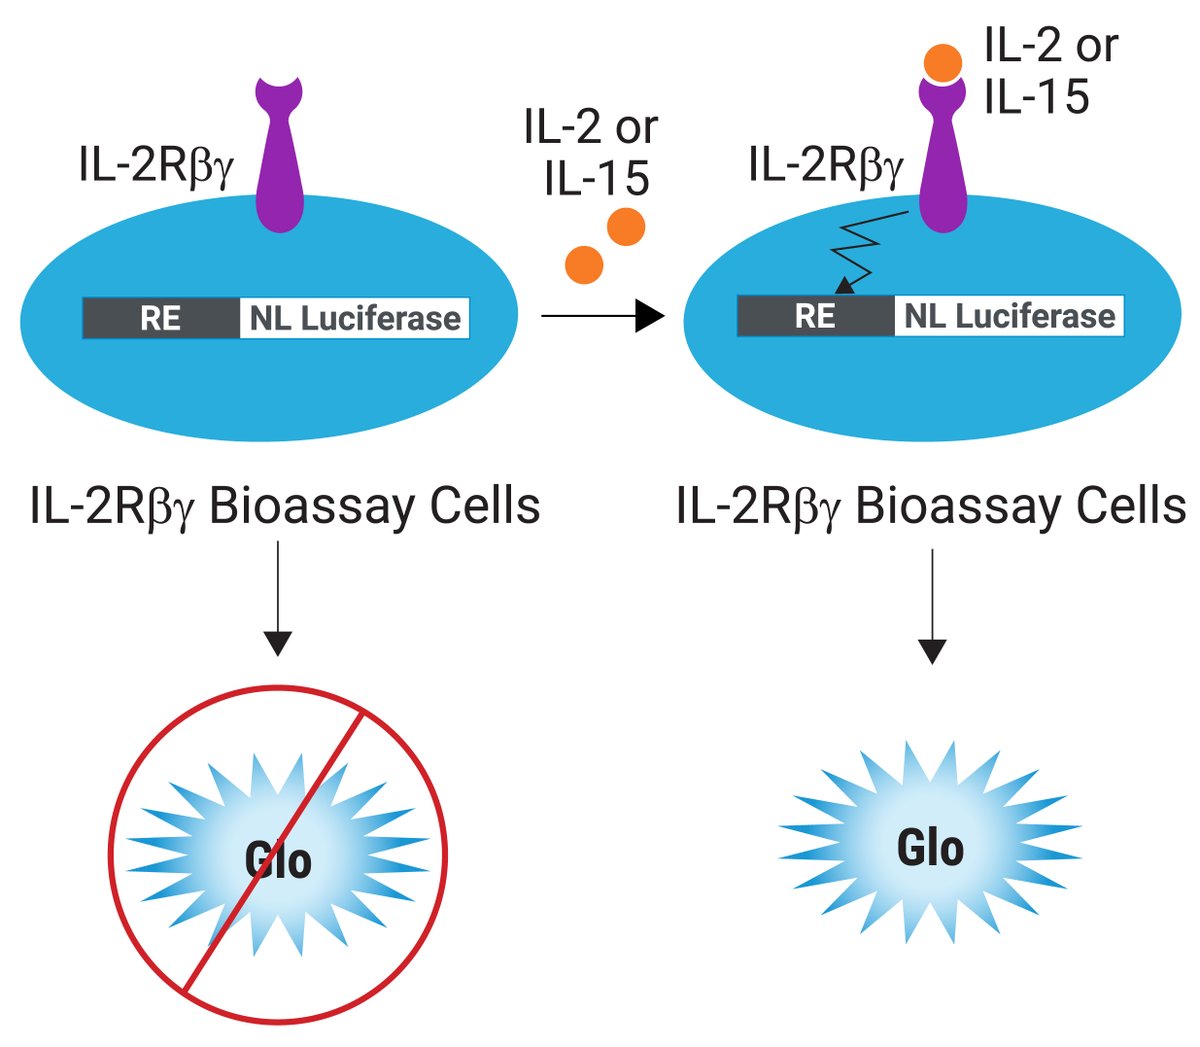 Our latest IL-2Rβγ Bioassay measures the activity of therapeutics designed to engage with the intermediate affinity IL-2 receptor (lacking CD25), expressed on T effector and NK cells. Find out more bit.ly/3UjQUzl

#lablife #Bioassay
#lifescience